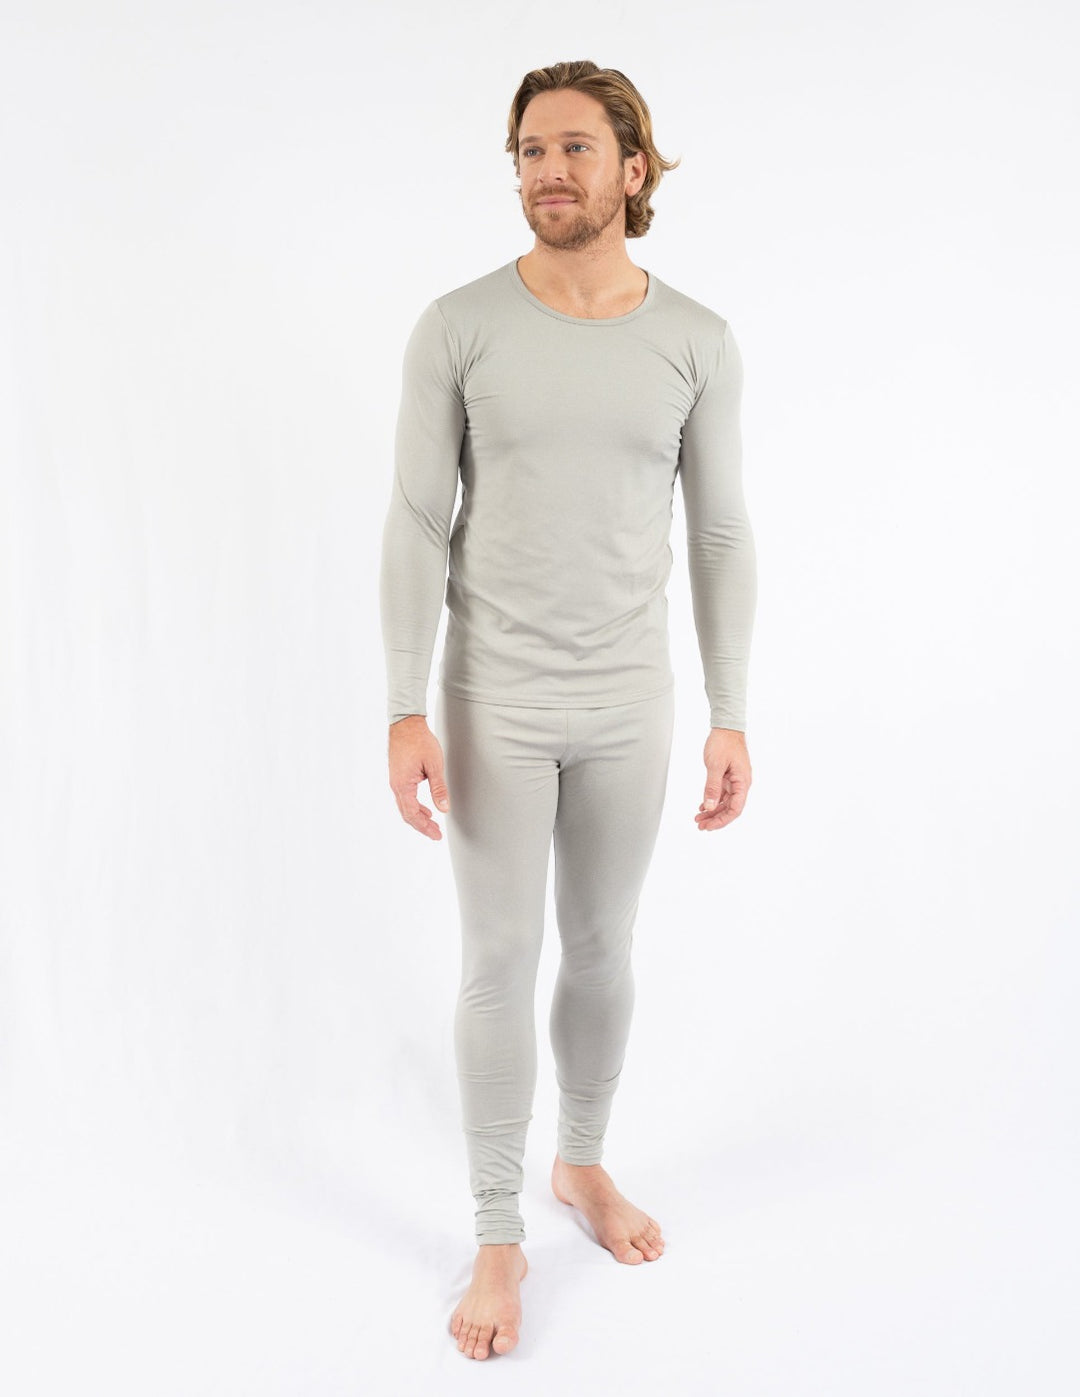 Browse And Buy Men's Thermal Underwear